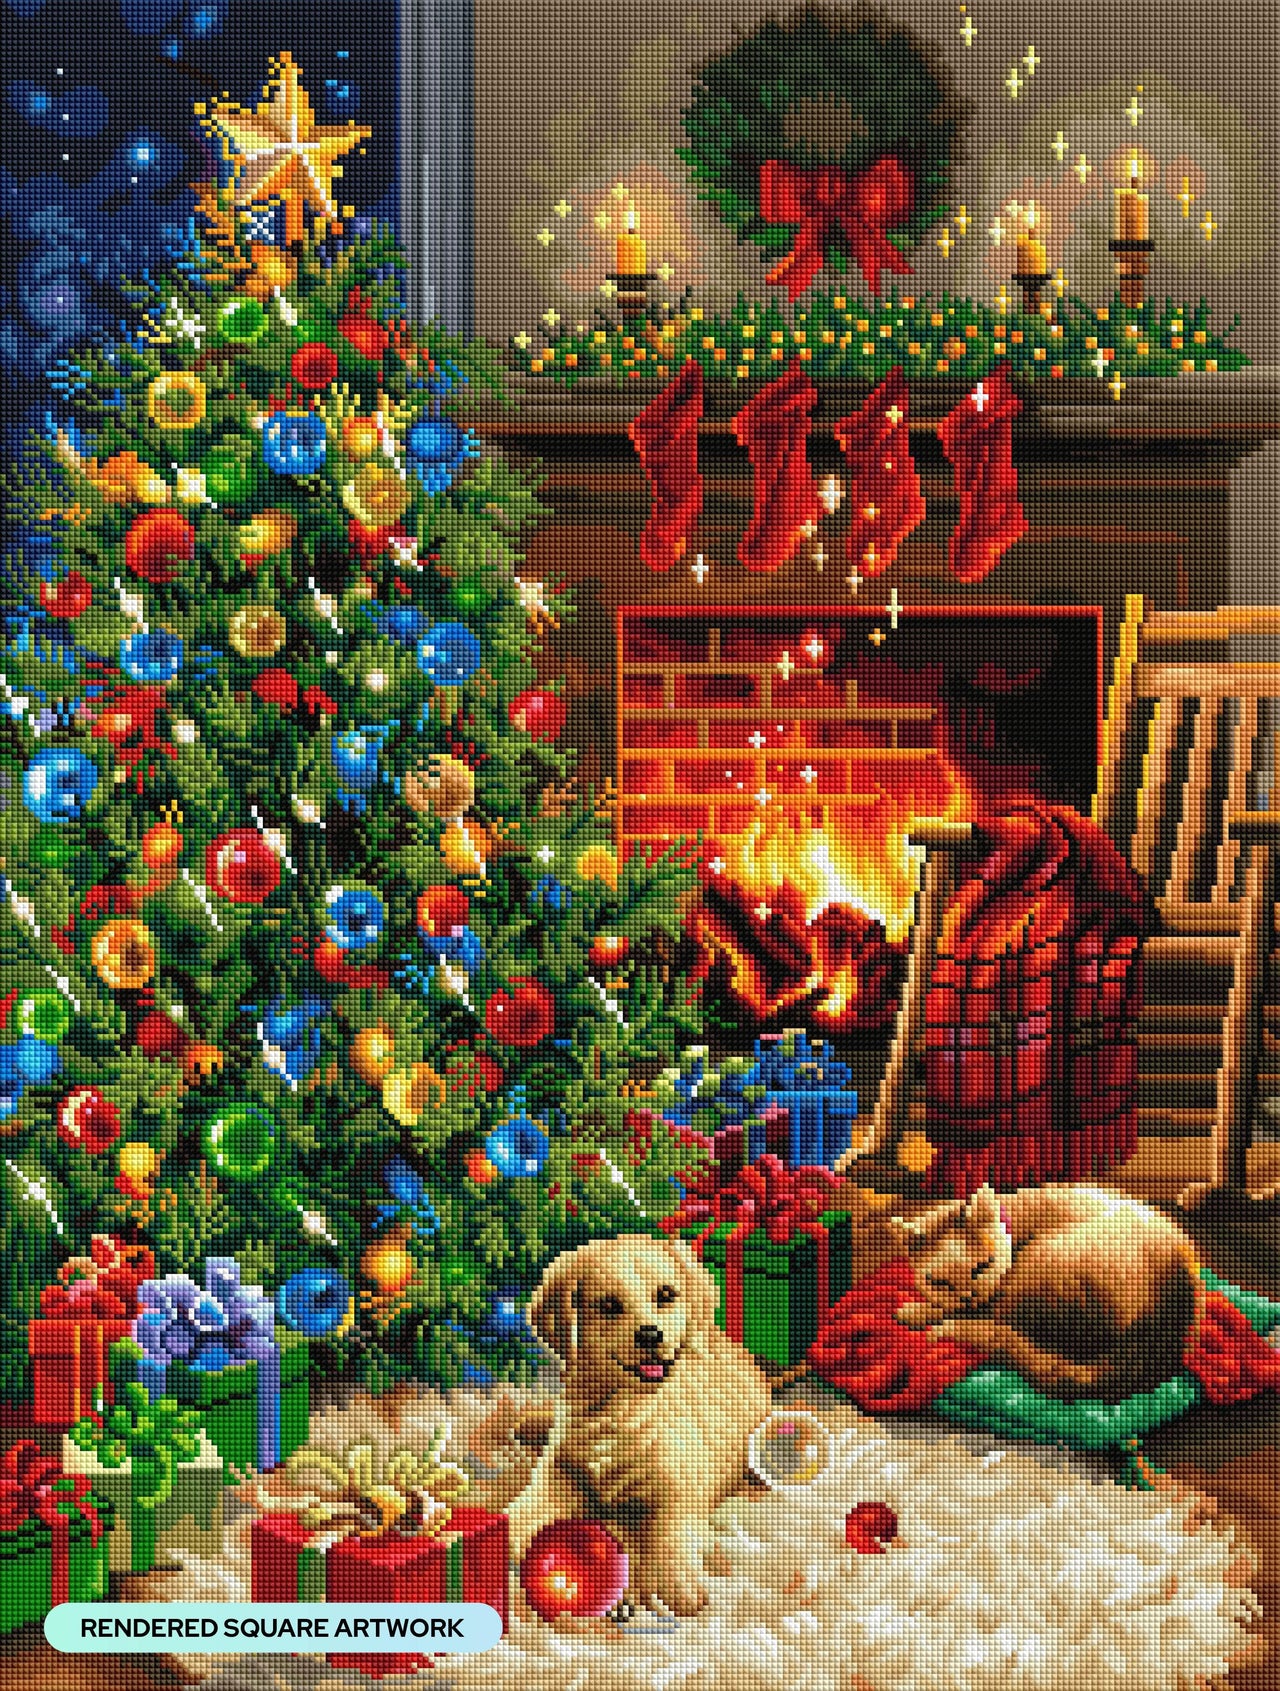 Diamond Painting Cozy Christmas 22" x 29" (55.8cm x 73.7cm) / Square with 74 Colors including 4 ABs / 65,725